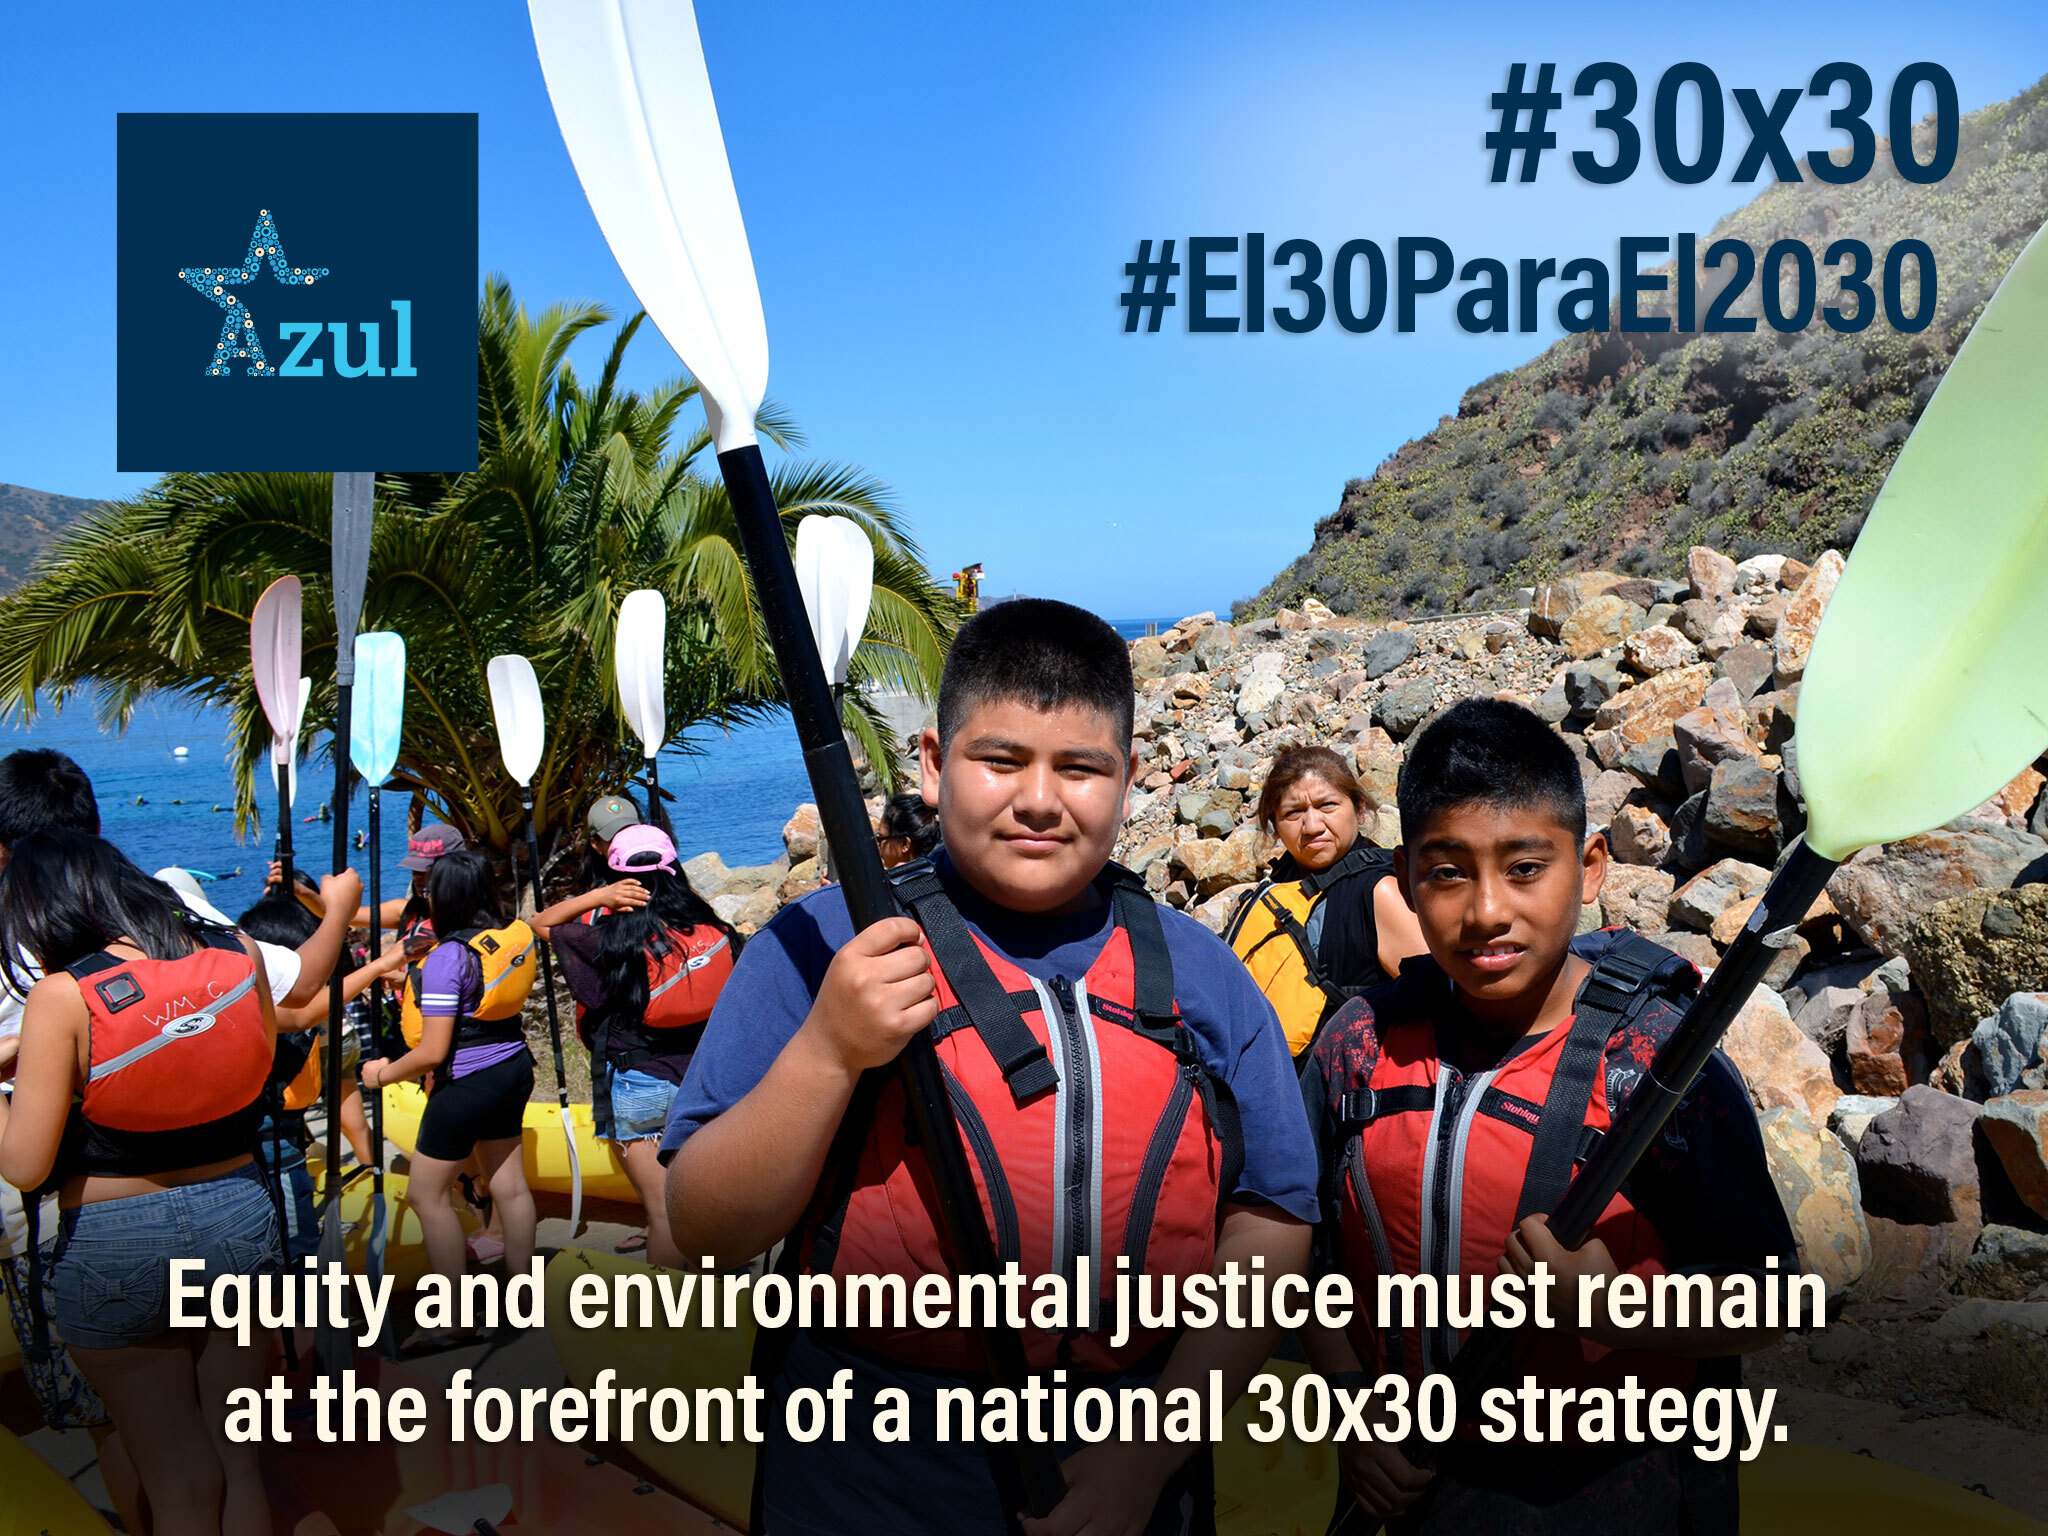 Our recommendations for a federal 30X30 strategy centered around equity and access